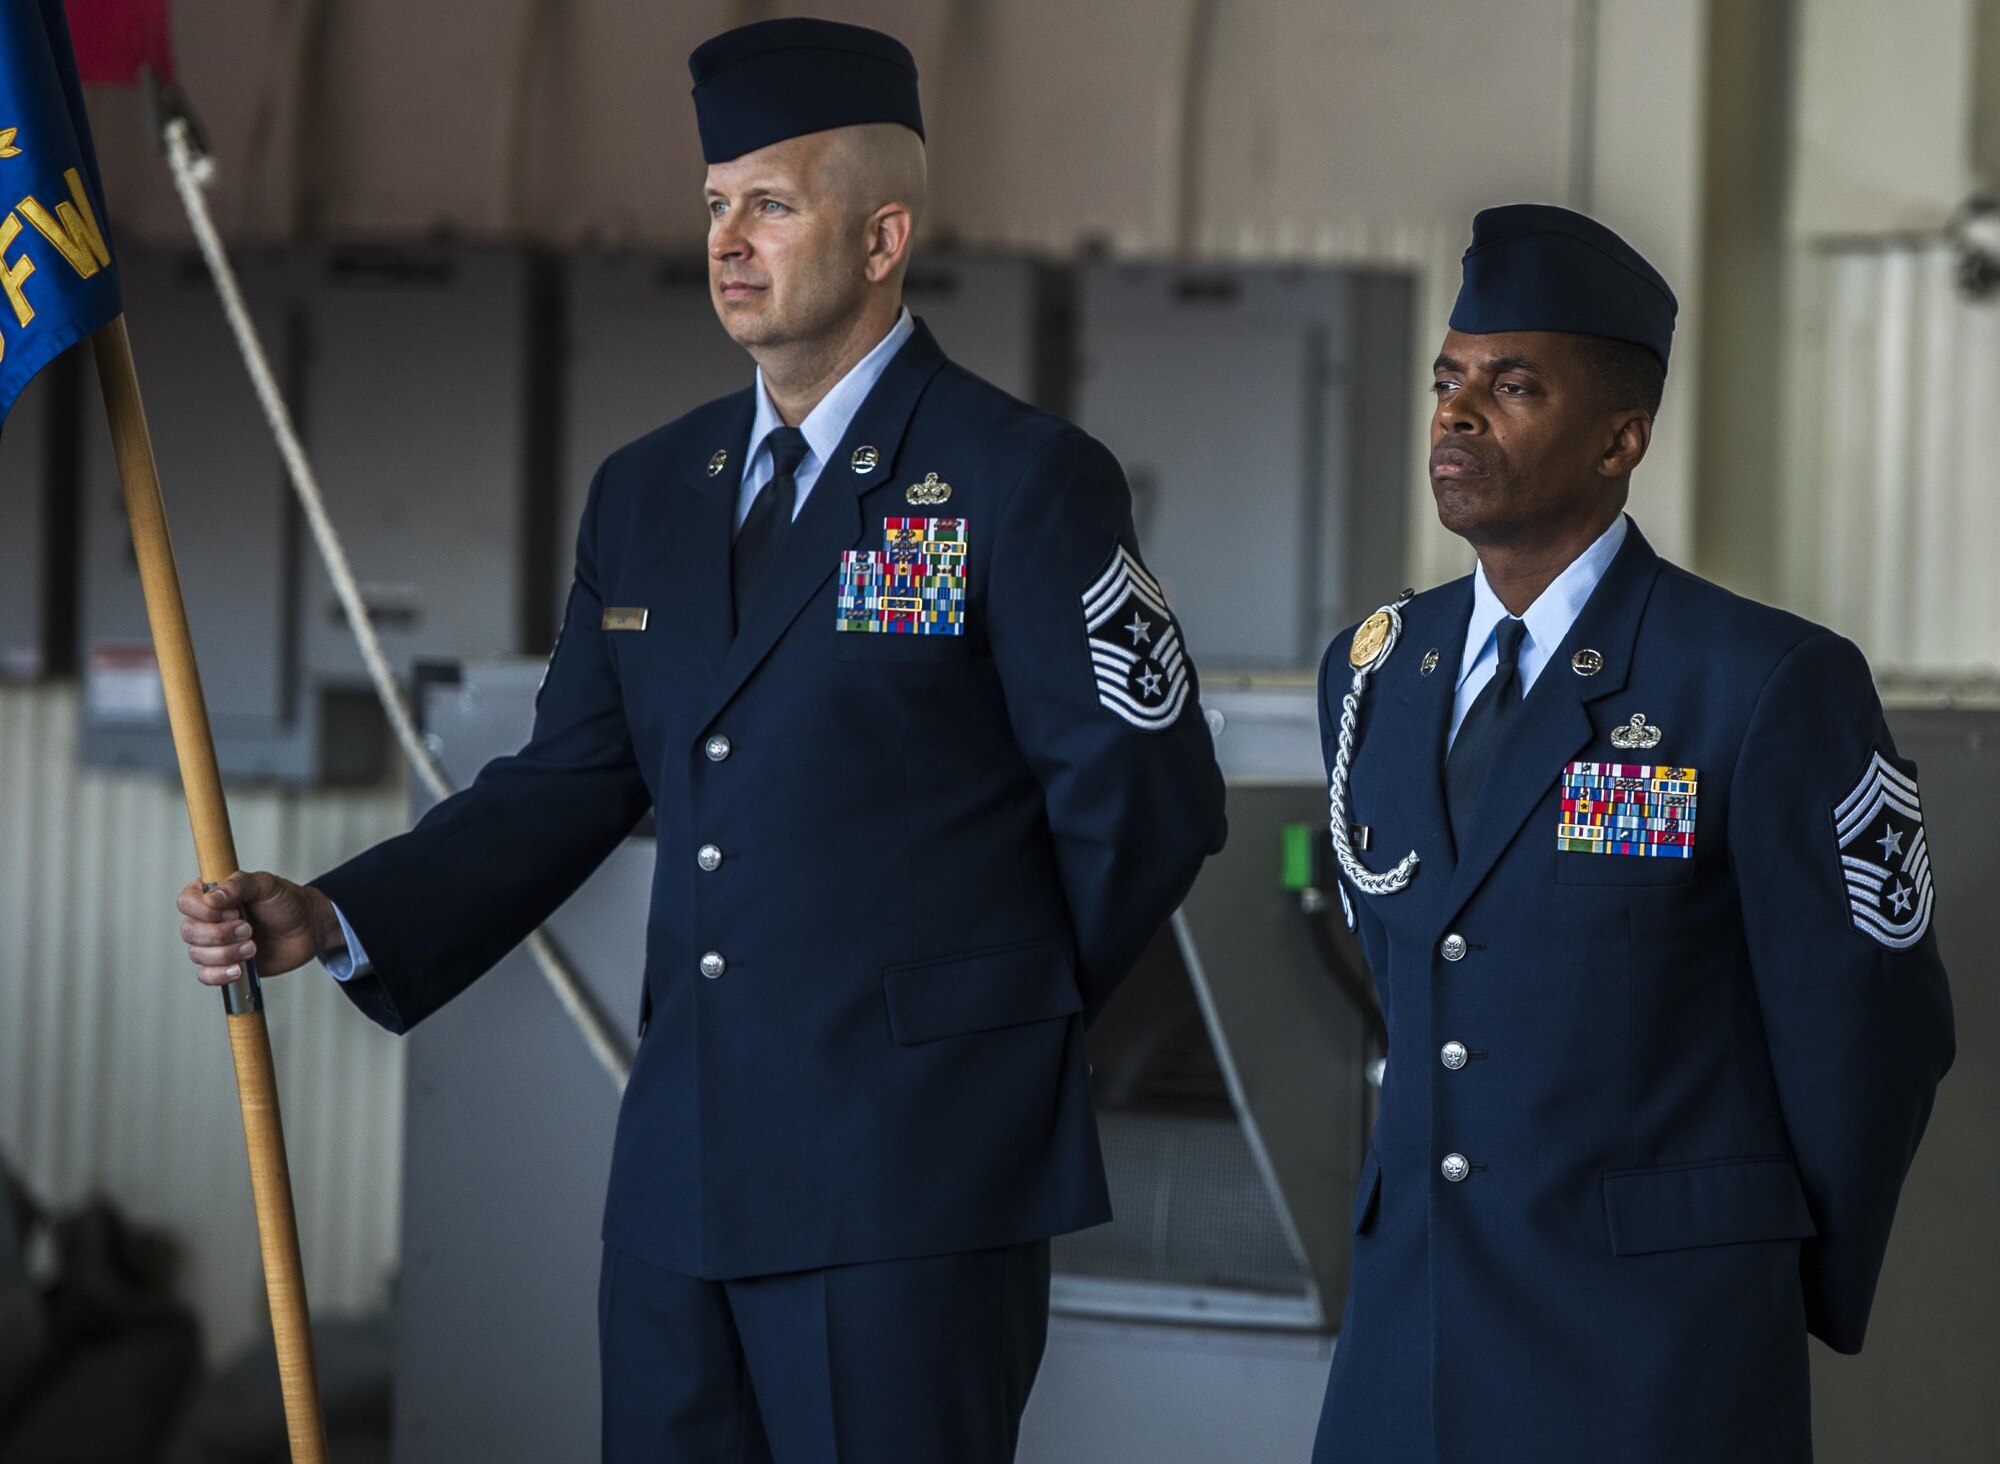 U.S. Air Force Chief Master Sergeant Charles C. Orf stands at parade rest next to Chief Master Sergeant Reiko Meekes at the 8th Fighter Wing change of command ceremony at Kunsan Air Base, Republic of Korea, May 25, 2017. Orf relinquished the position of 8th Fighter Wing command chief to Chief Master Sergeant Meekes, as the base transferred command from Wolf 56 to Wolf 57. (U.S. Air Force photo by Senior Airman Colville McFee/Released)